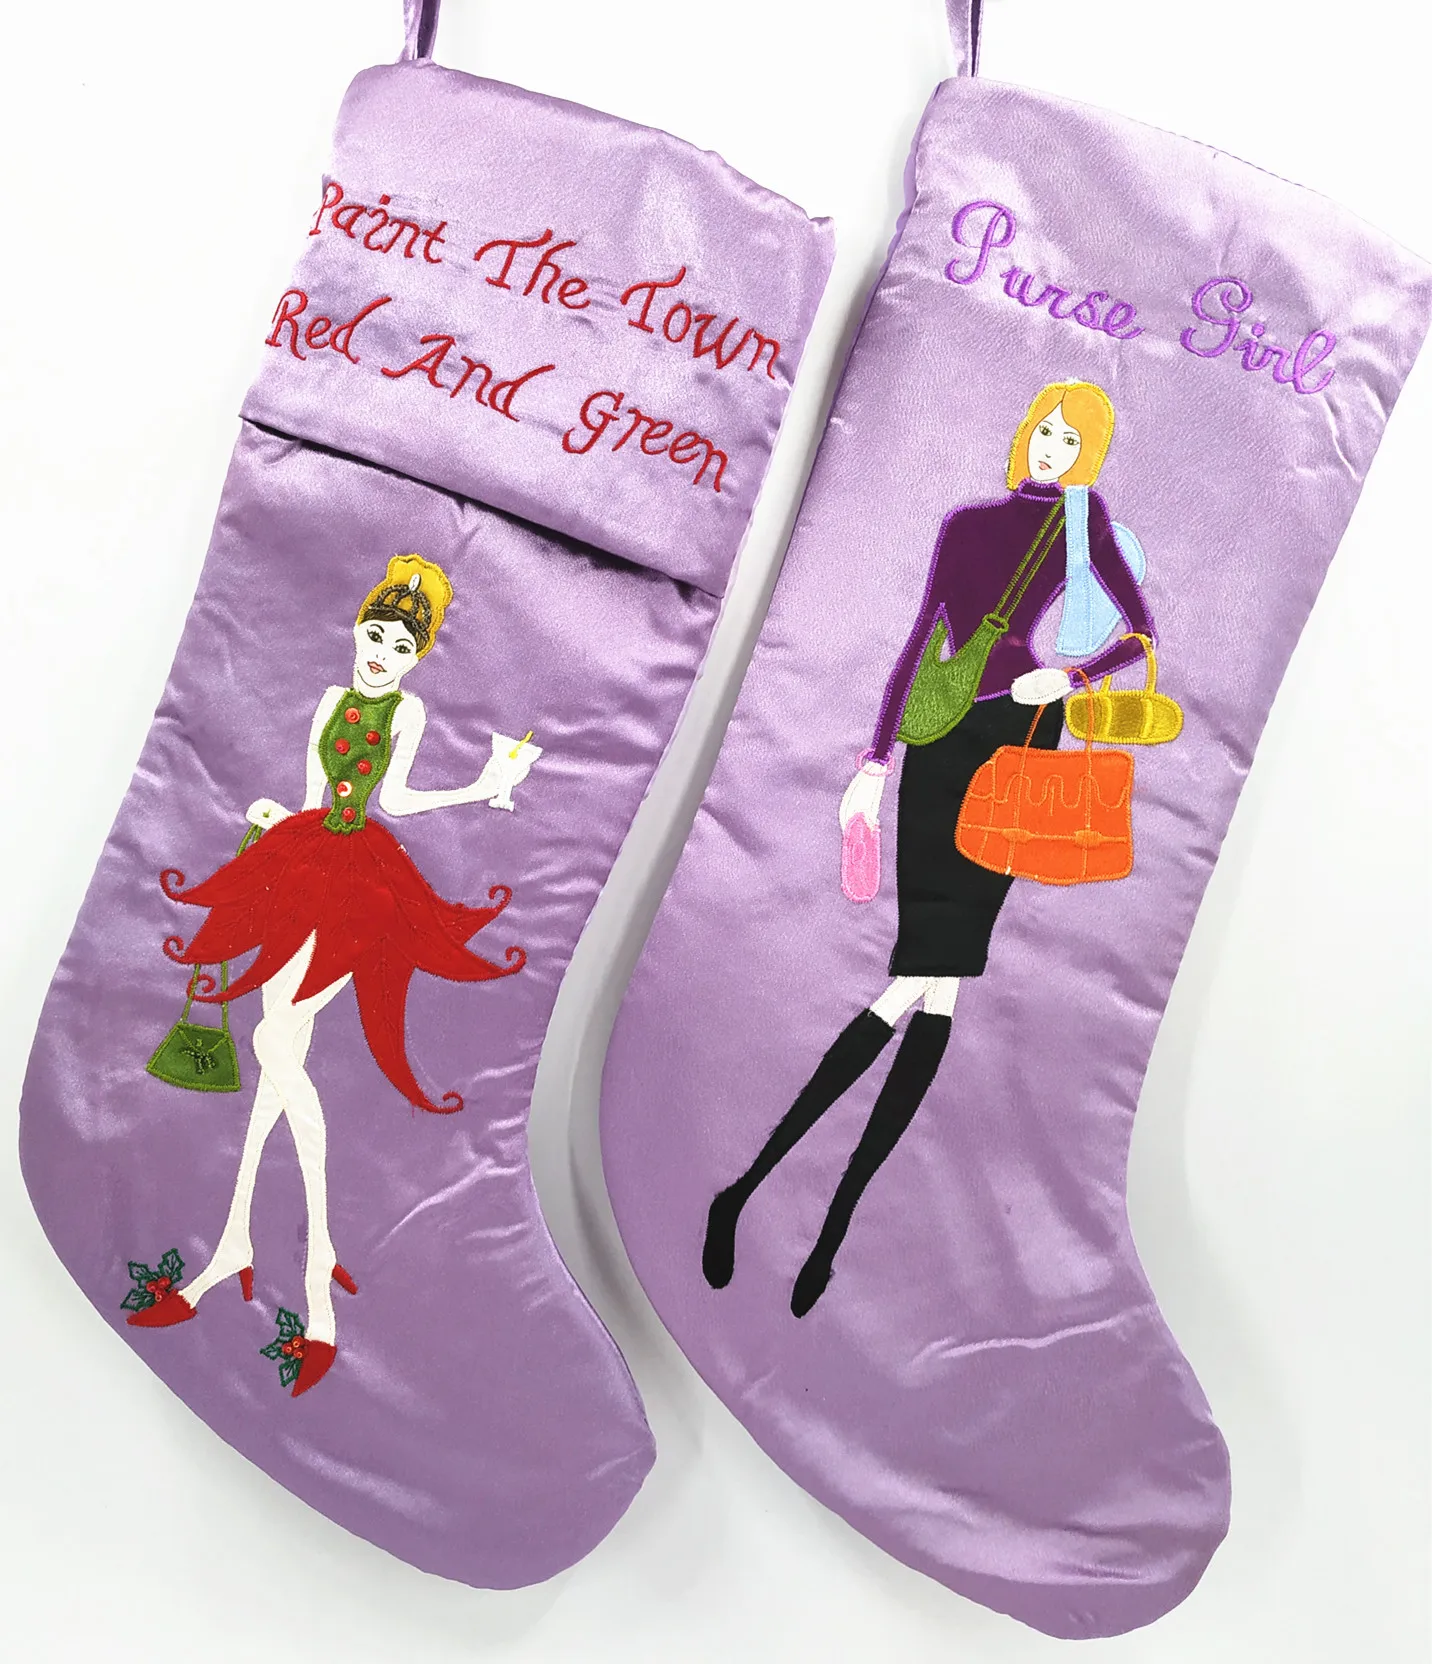 

New 2pcs/set Urban Style Christmas Stocking Big Gift Bags with High Quality 21" Long